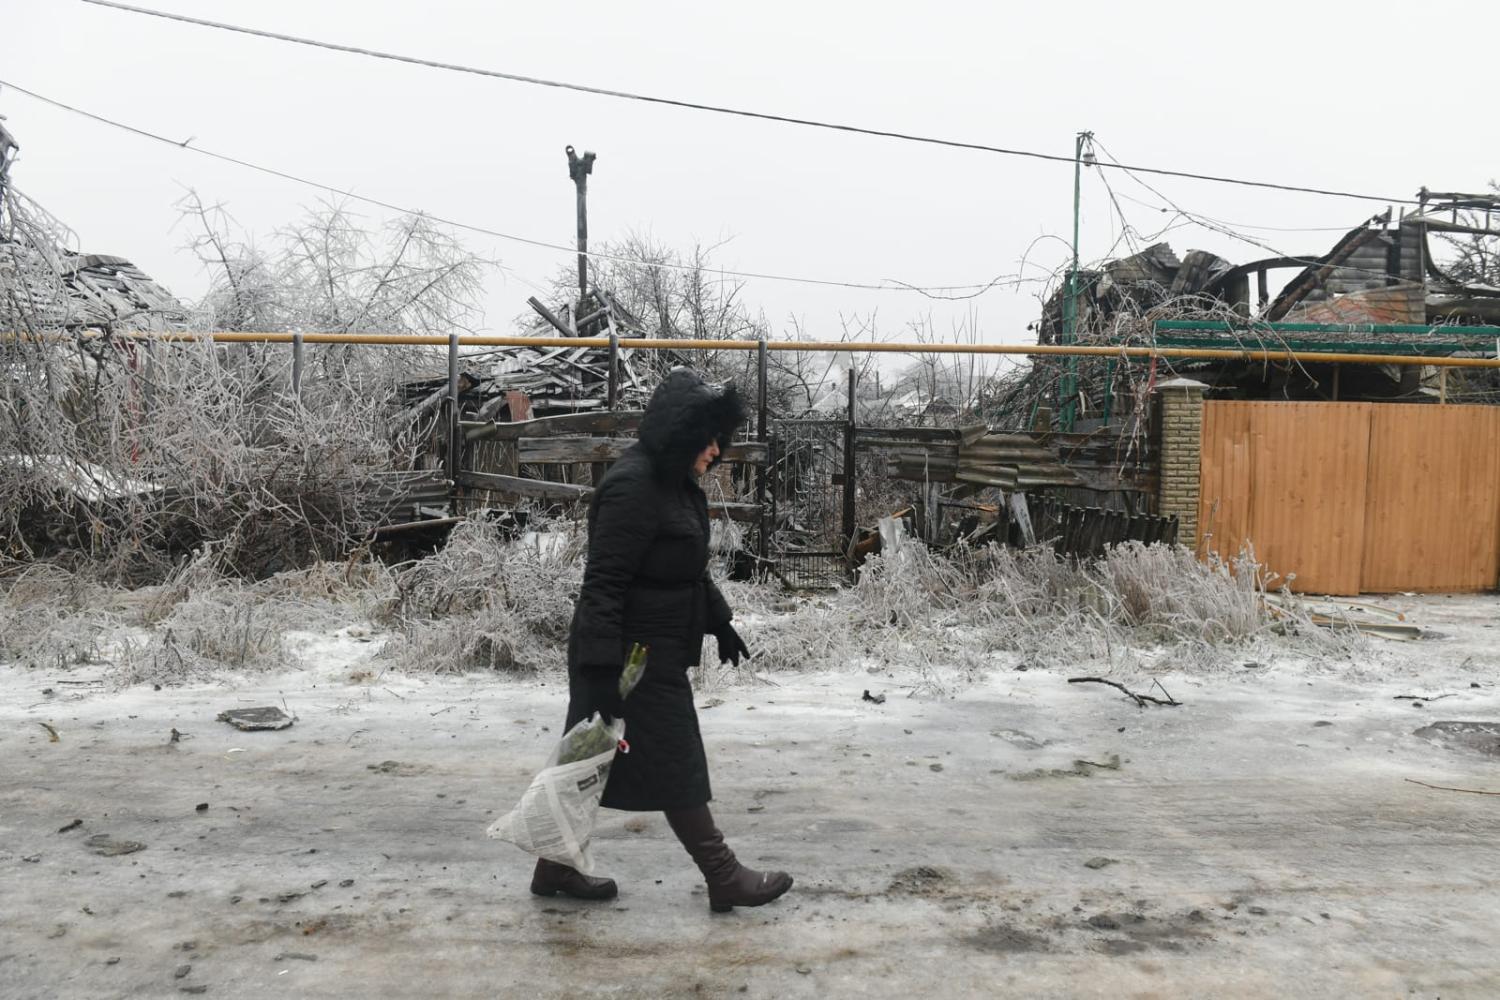 The aftermath of recent shelling in Yasynuvata (AFP via Getty Images)